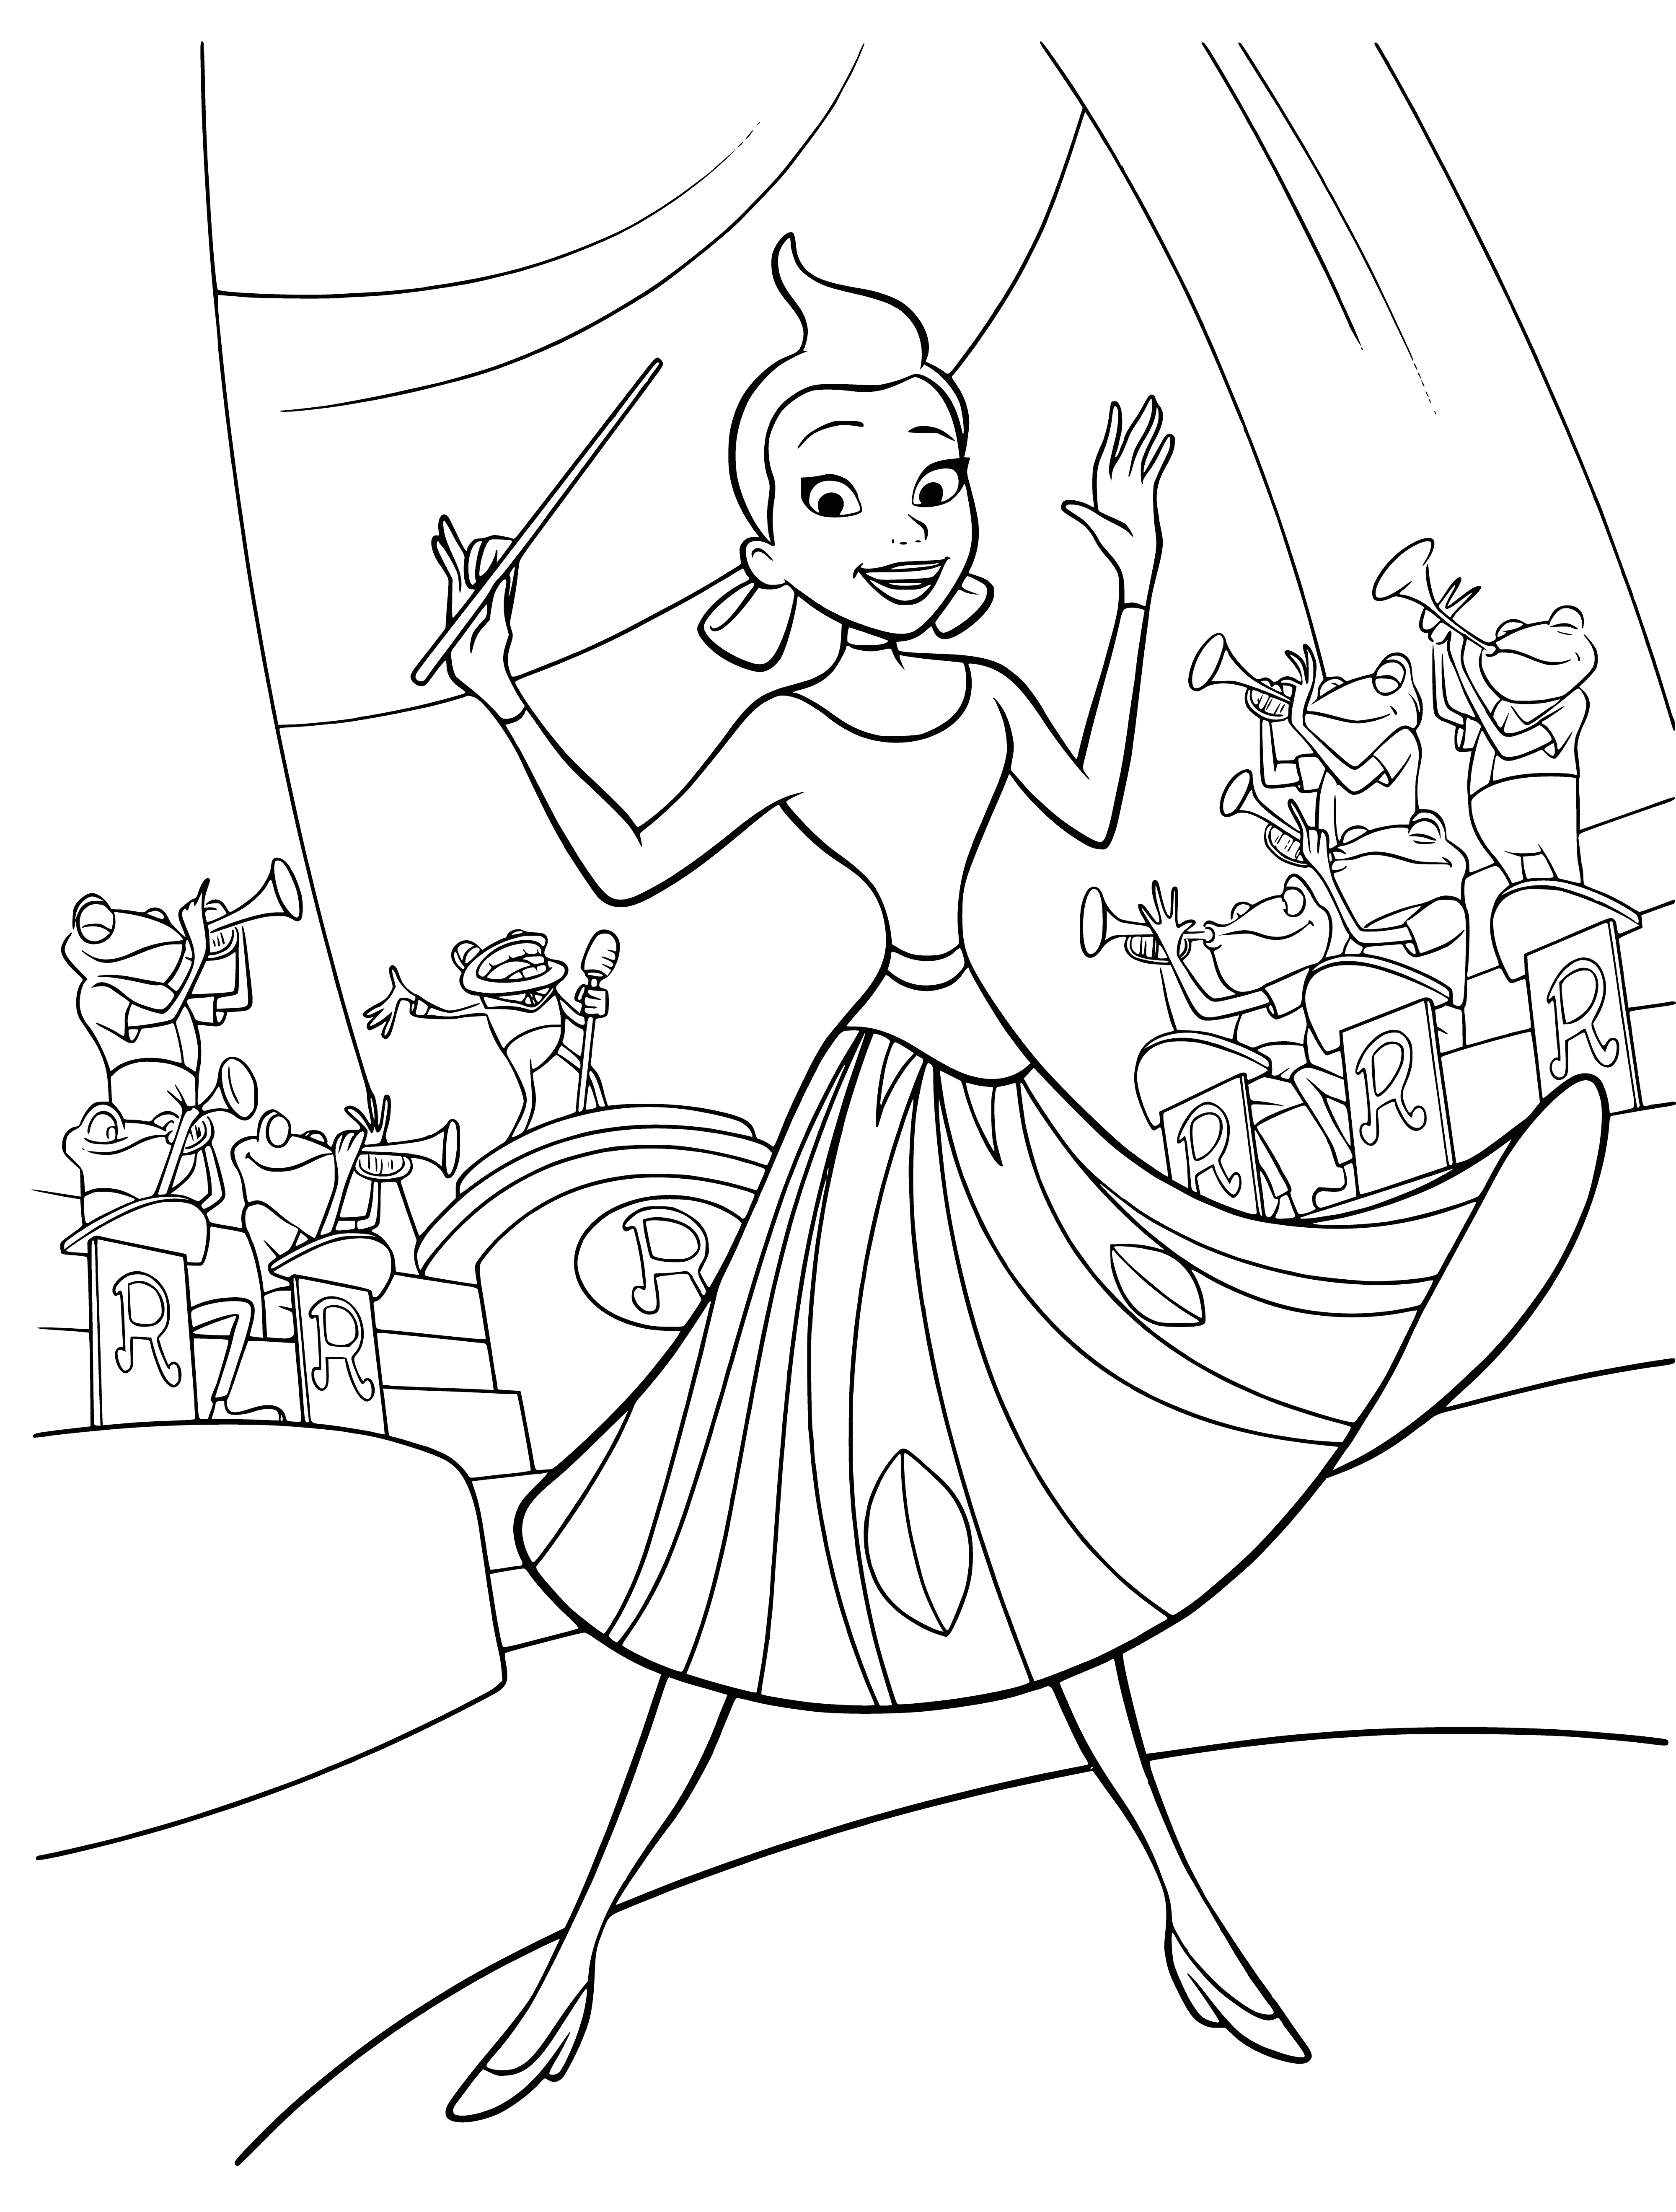 coloring page: Three frogs making music with drums, guitar and trumpet in a band - a hopping band!